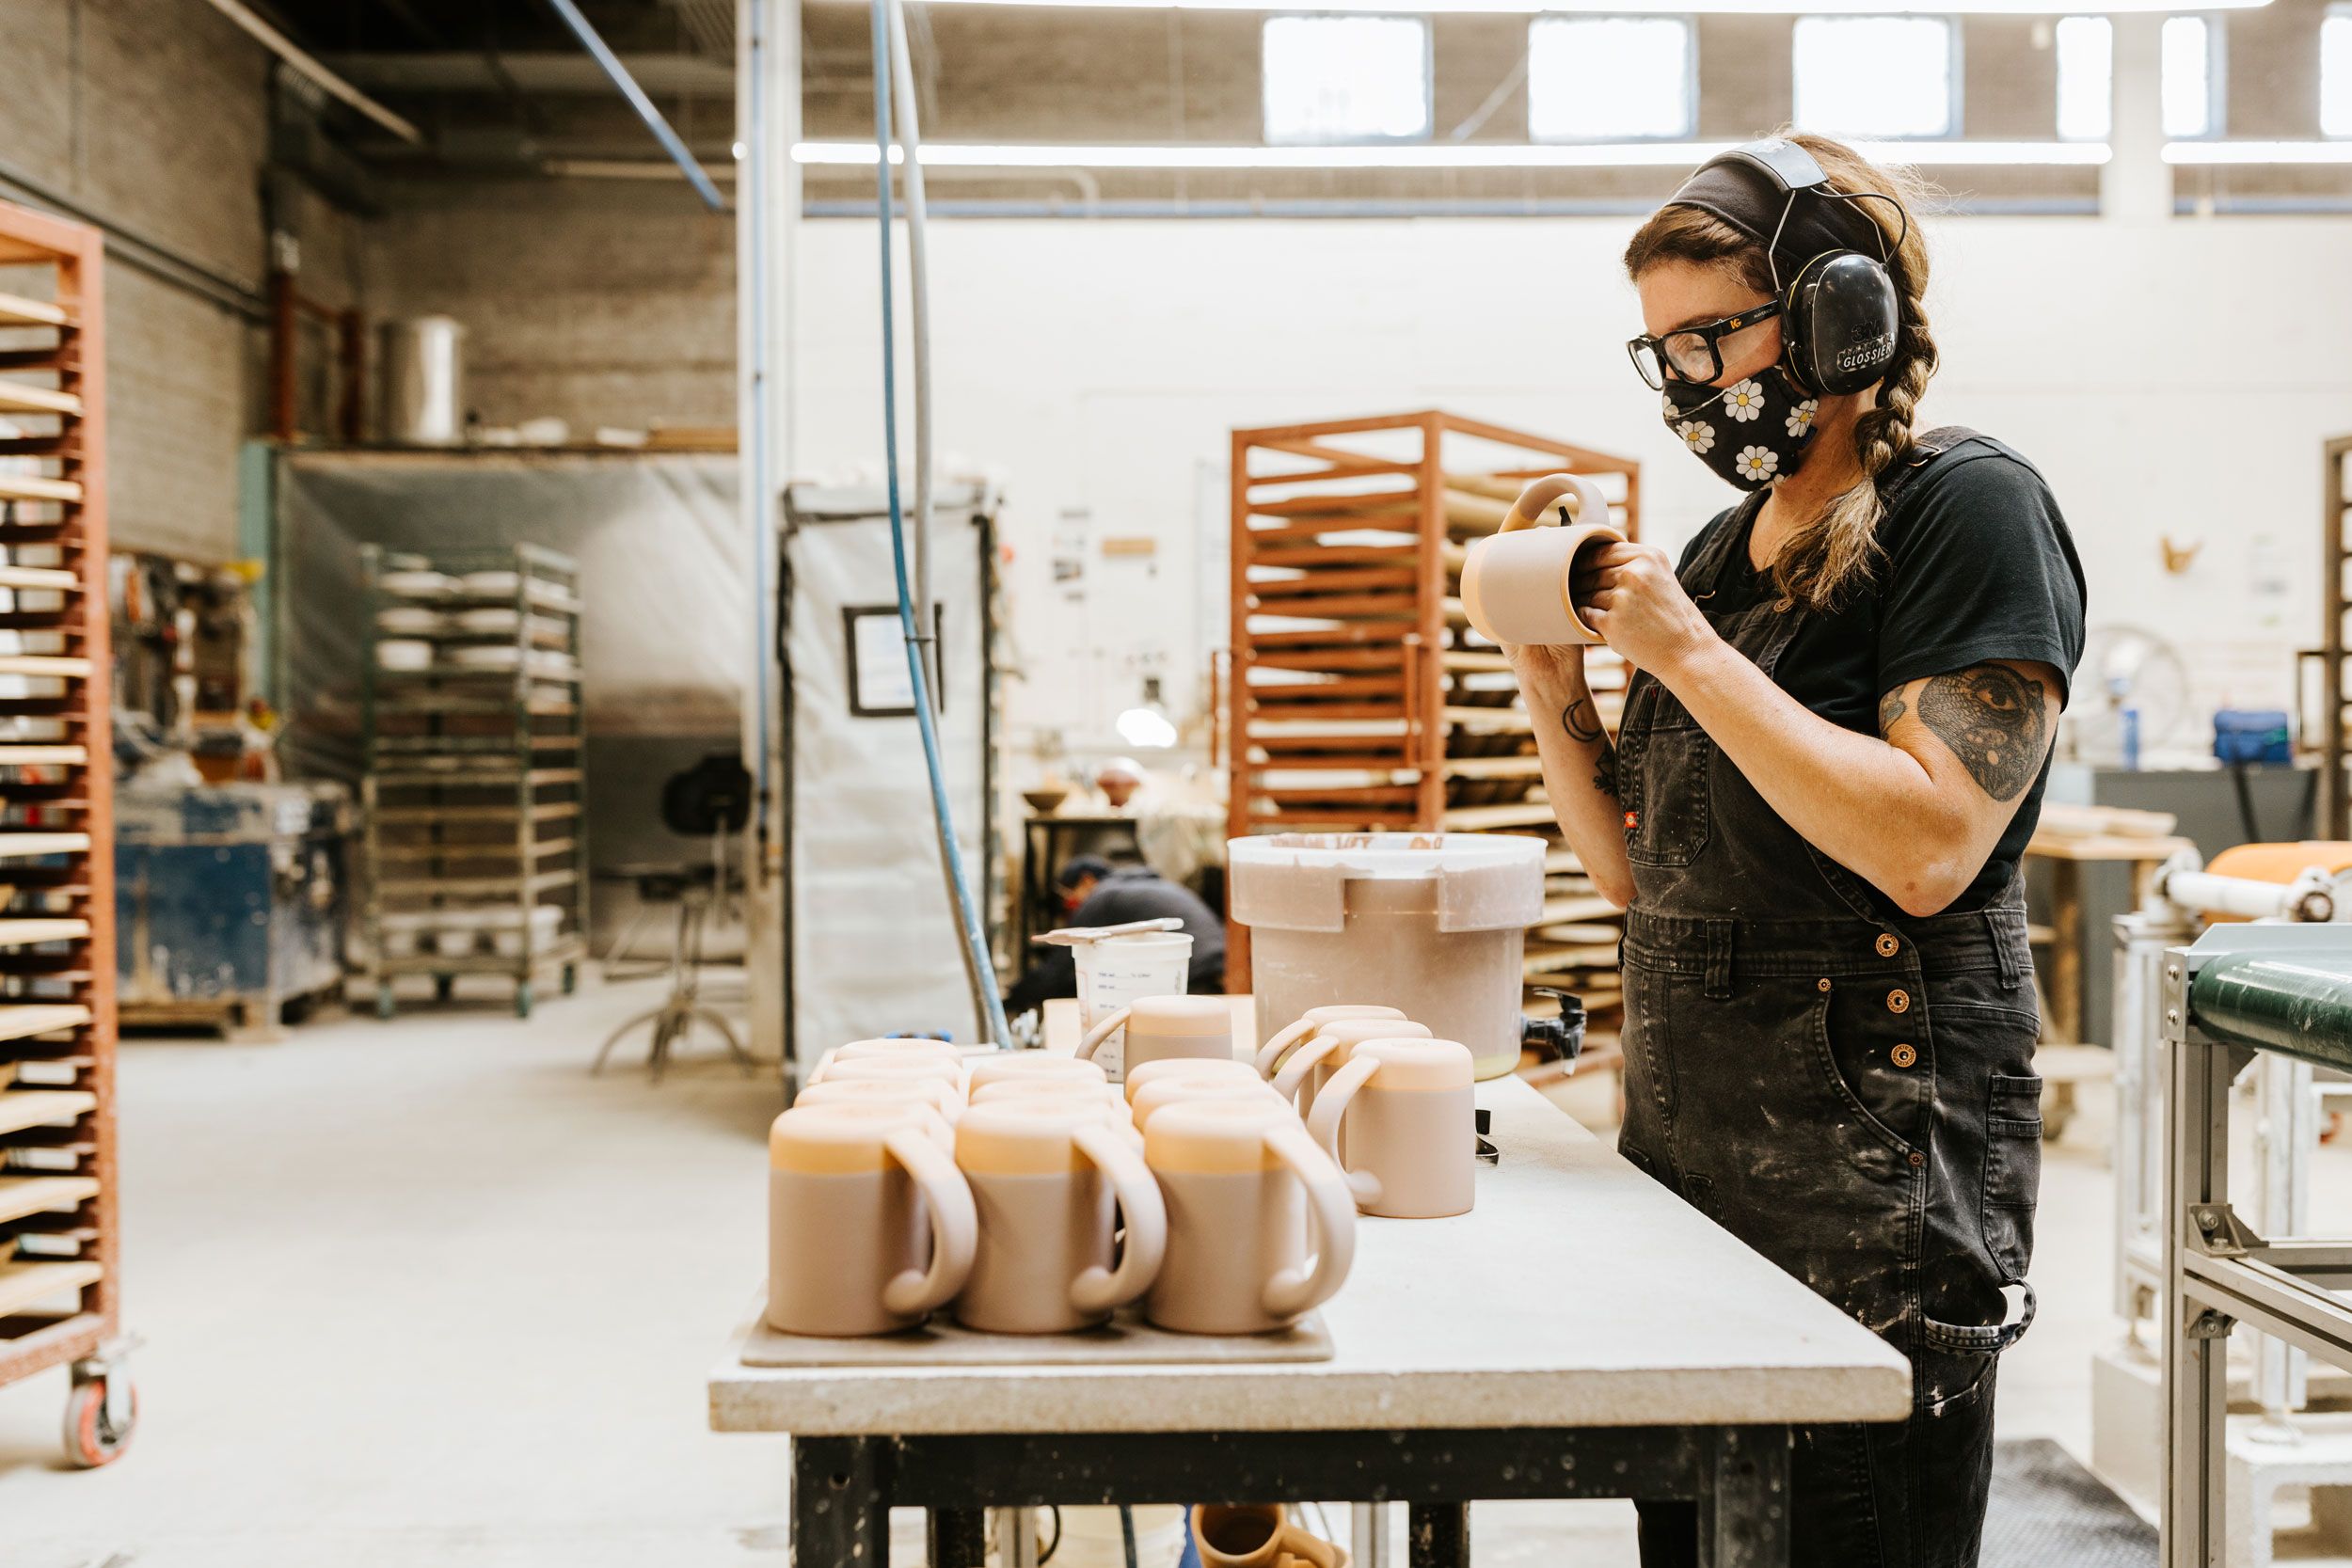 A person wearing safety headphones and a mask is working on mug and standing in front of a table of unglazed mugs.